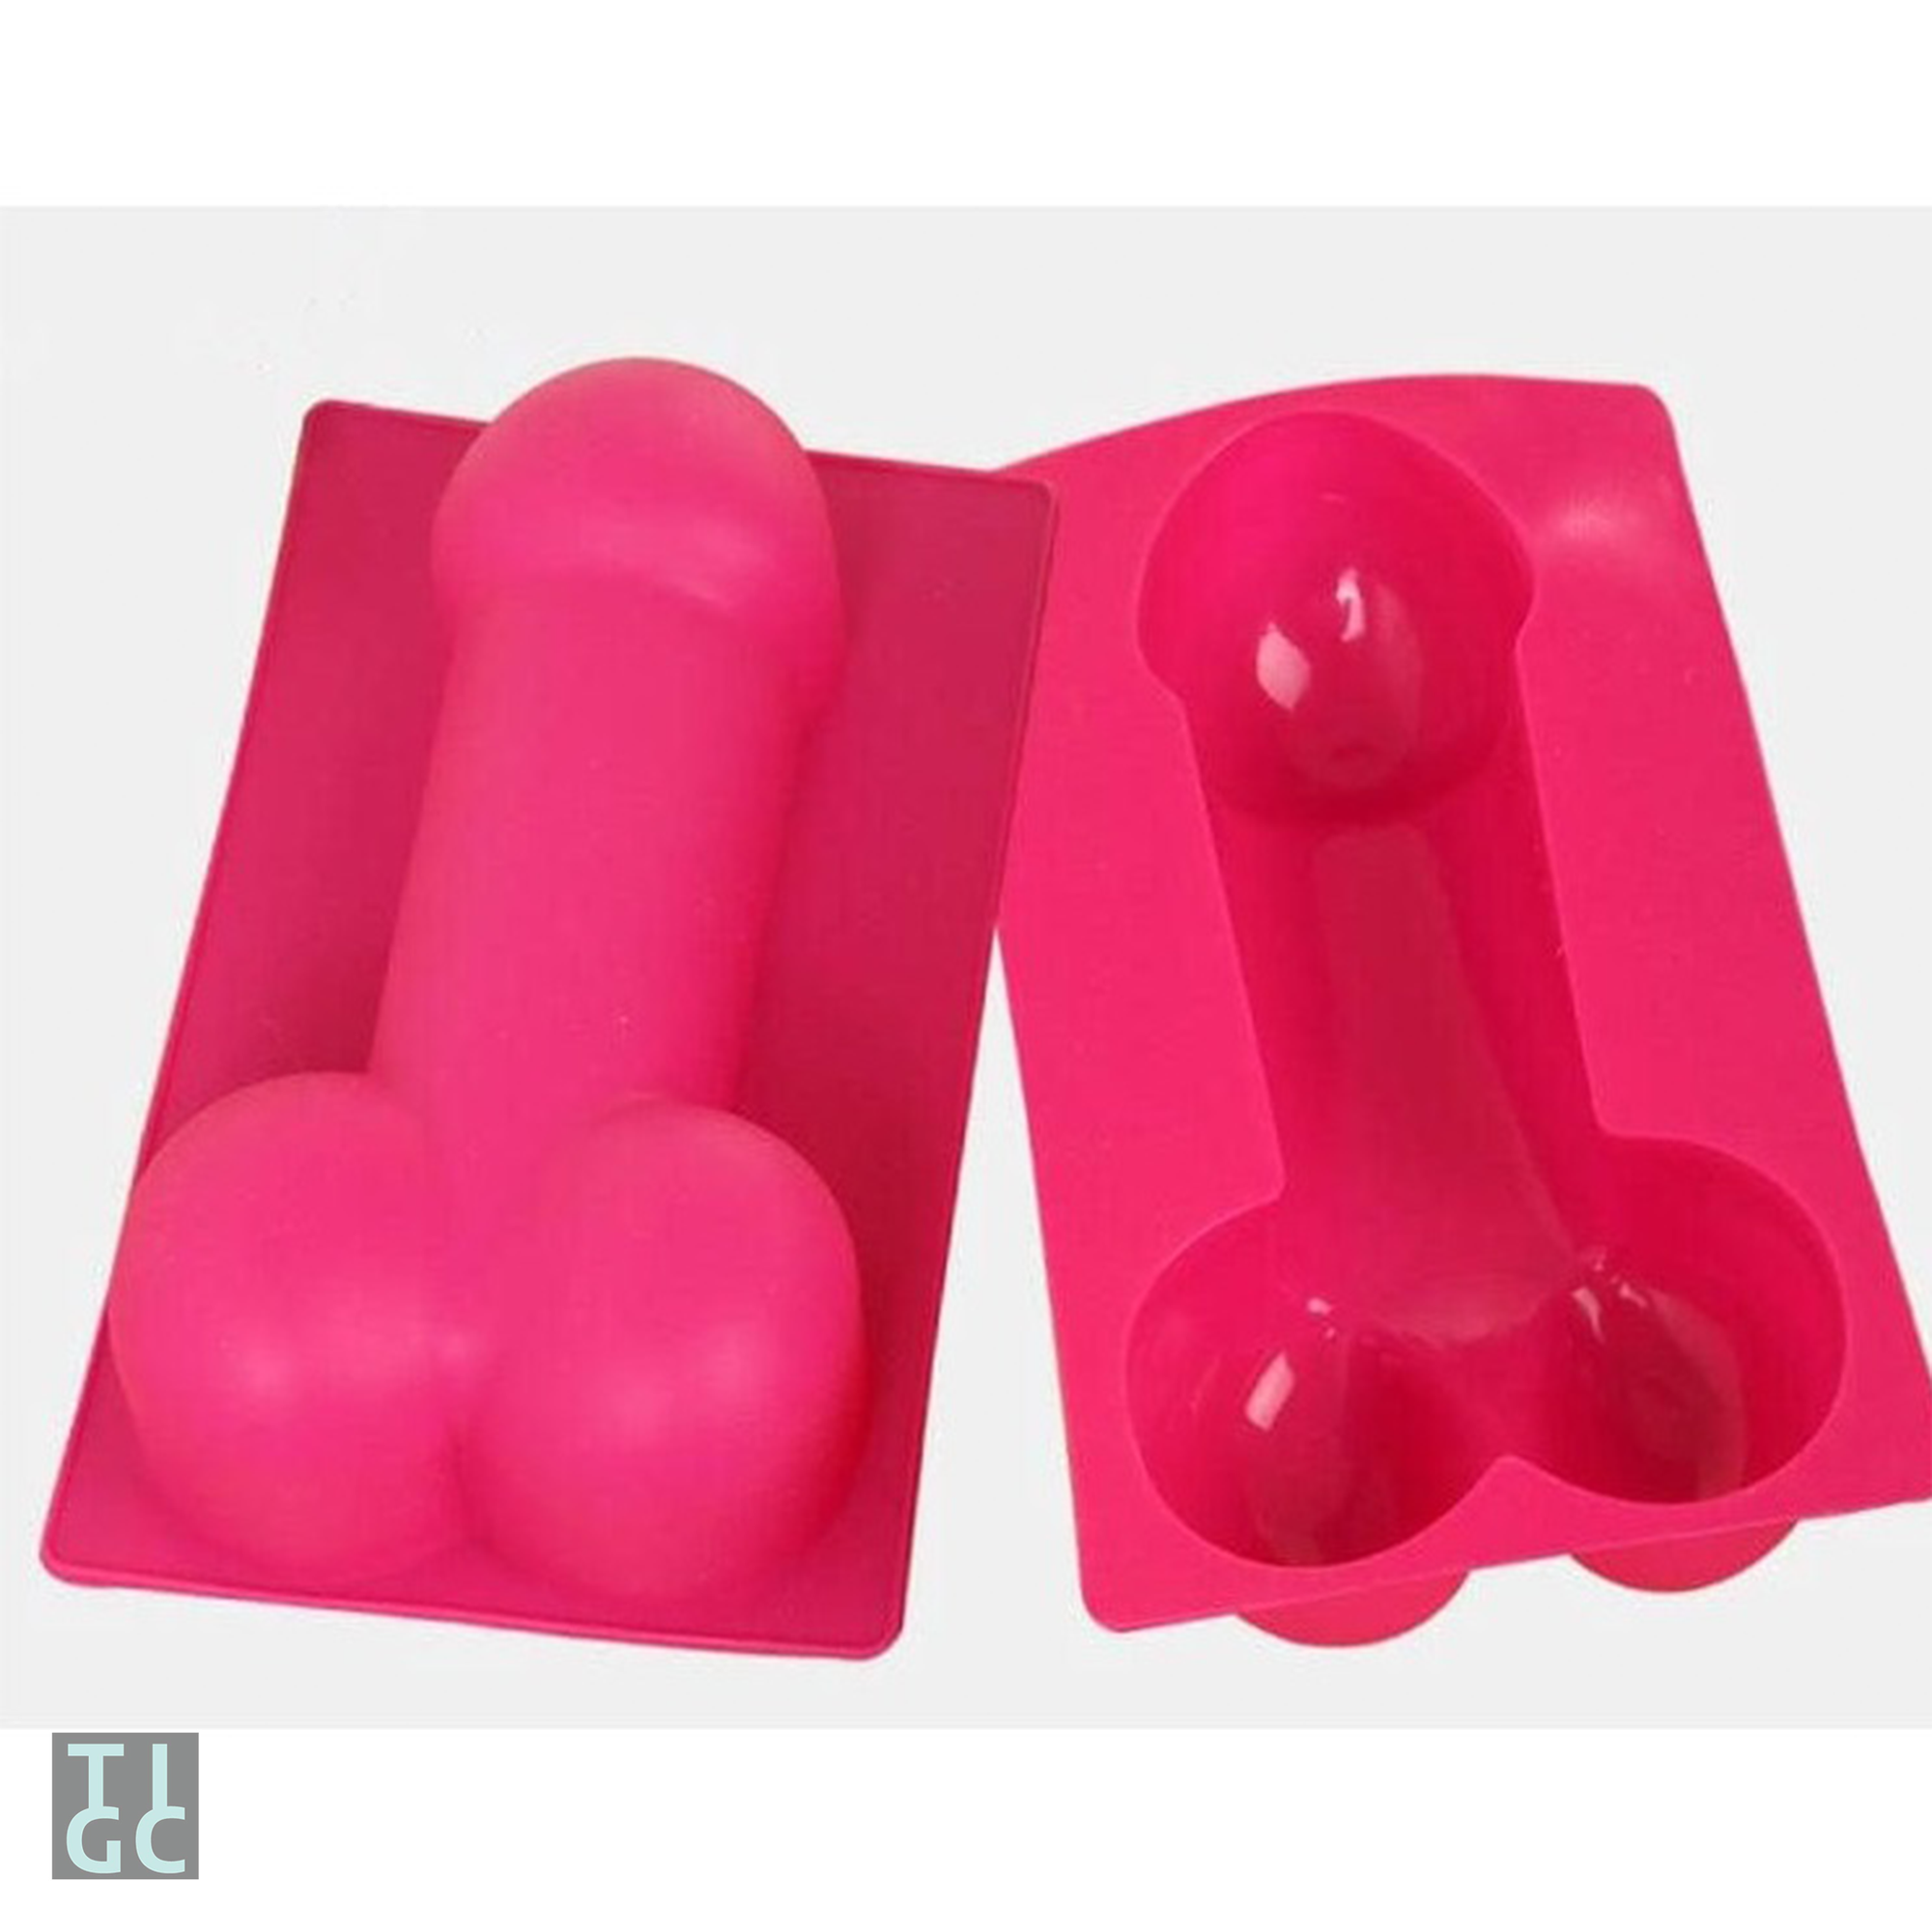 https://cdn.shopify.com/s/files/1/2423/8037/products/tigc-the-inappropriate-gift-co-inappropriate-cake-penis-mold-29922757640234_2000x.png?v=1666506468